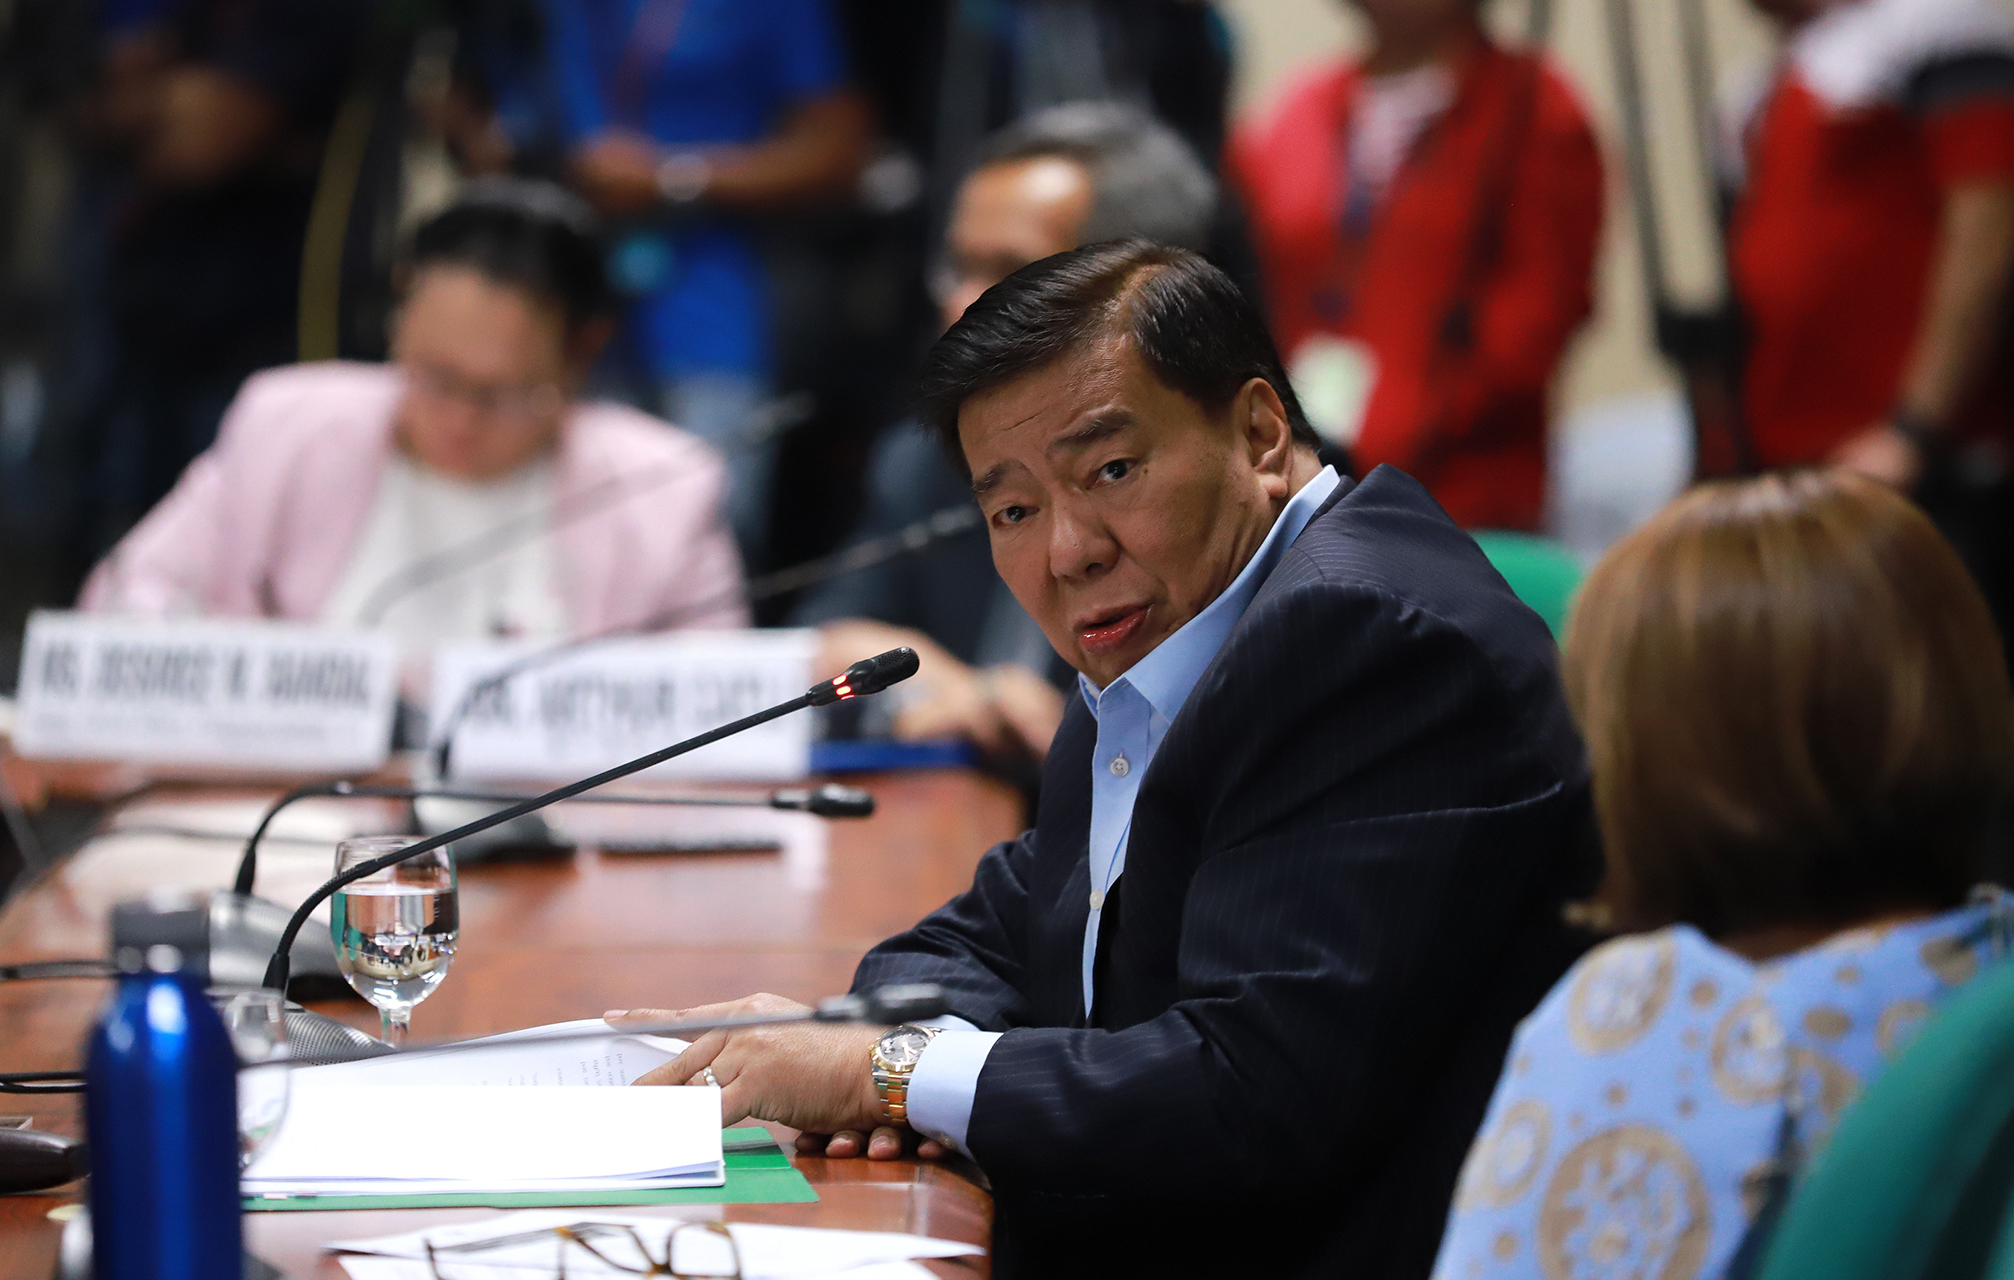 Senate Minority Leader Franklin Drilon, chairperson of the Committee on Tourism, ask officials of the health department, airline industry and tourism sector to give them an update on the impact of the 2019 nCoV in the country’s tourism industry Tuesday’s public hearing, February 11, 2020. (Joseph Vidal/Senate PRIB)